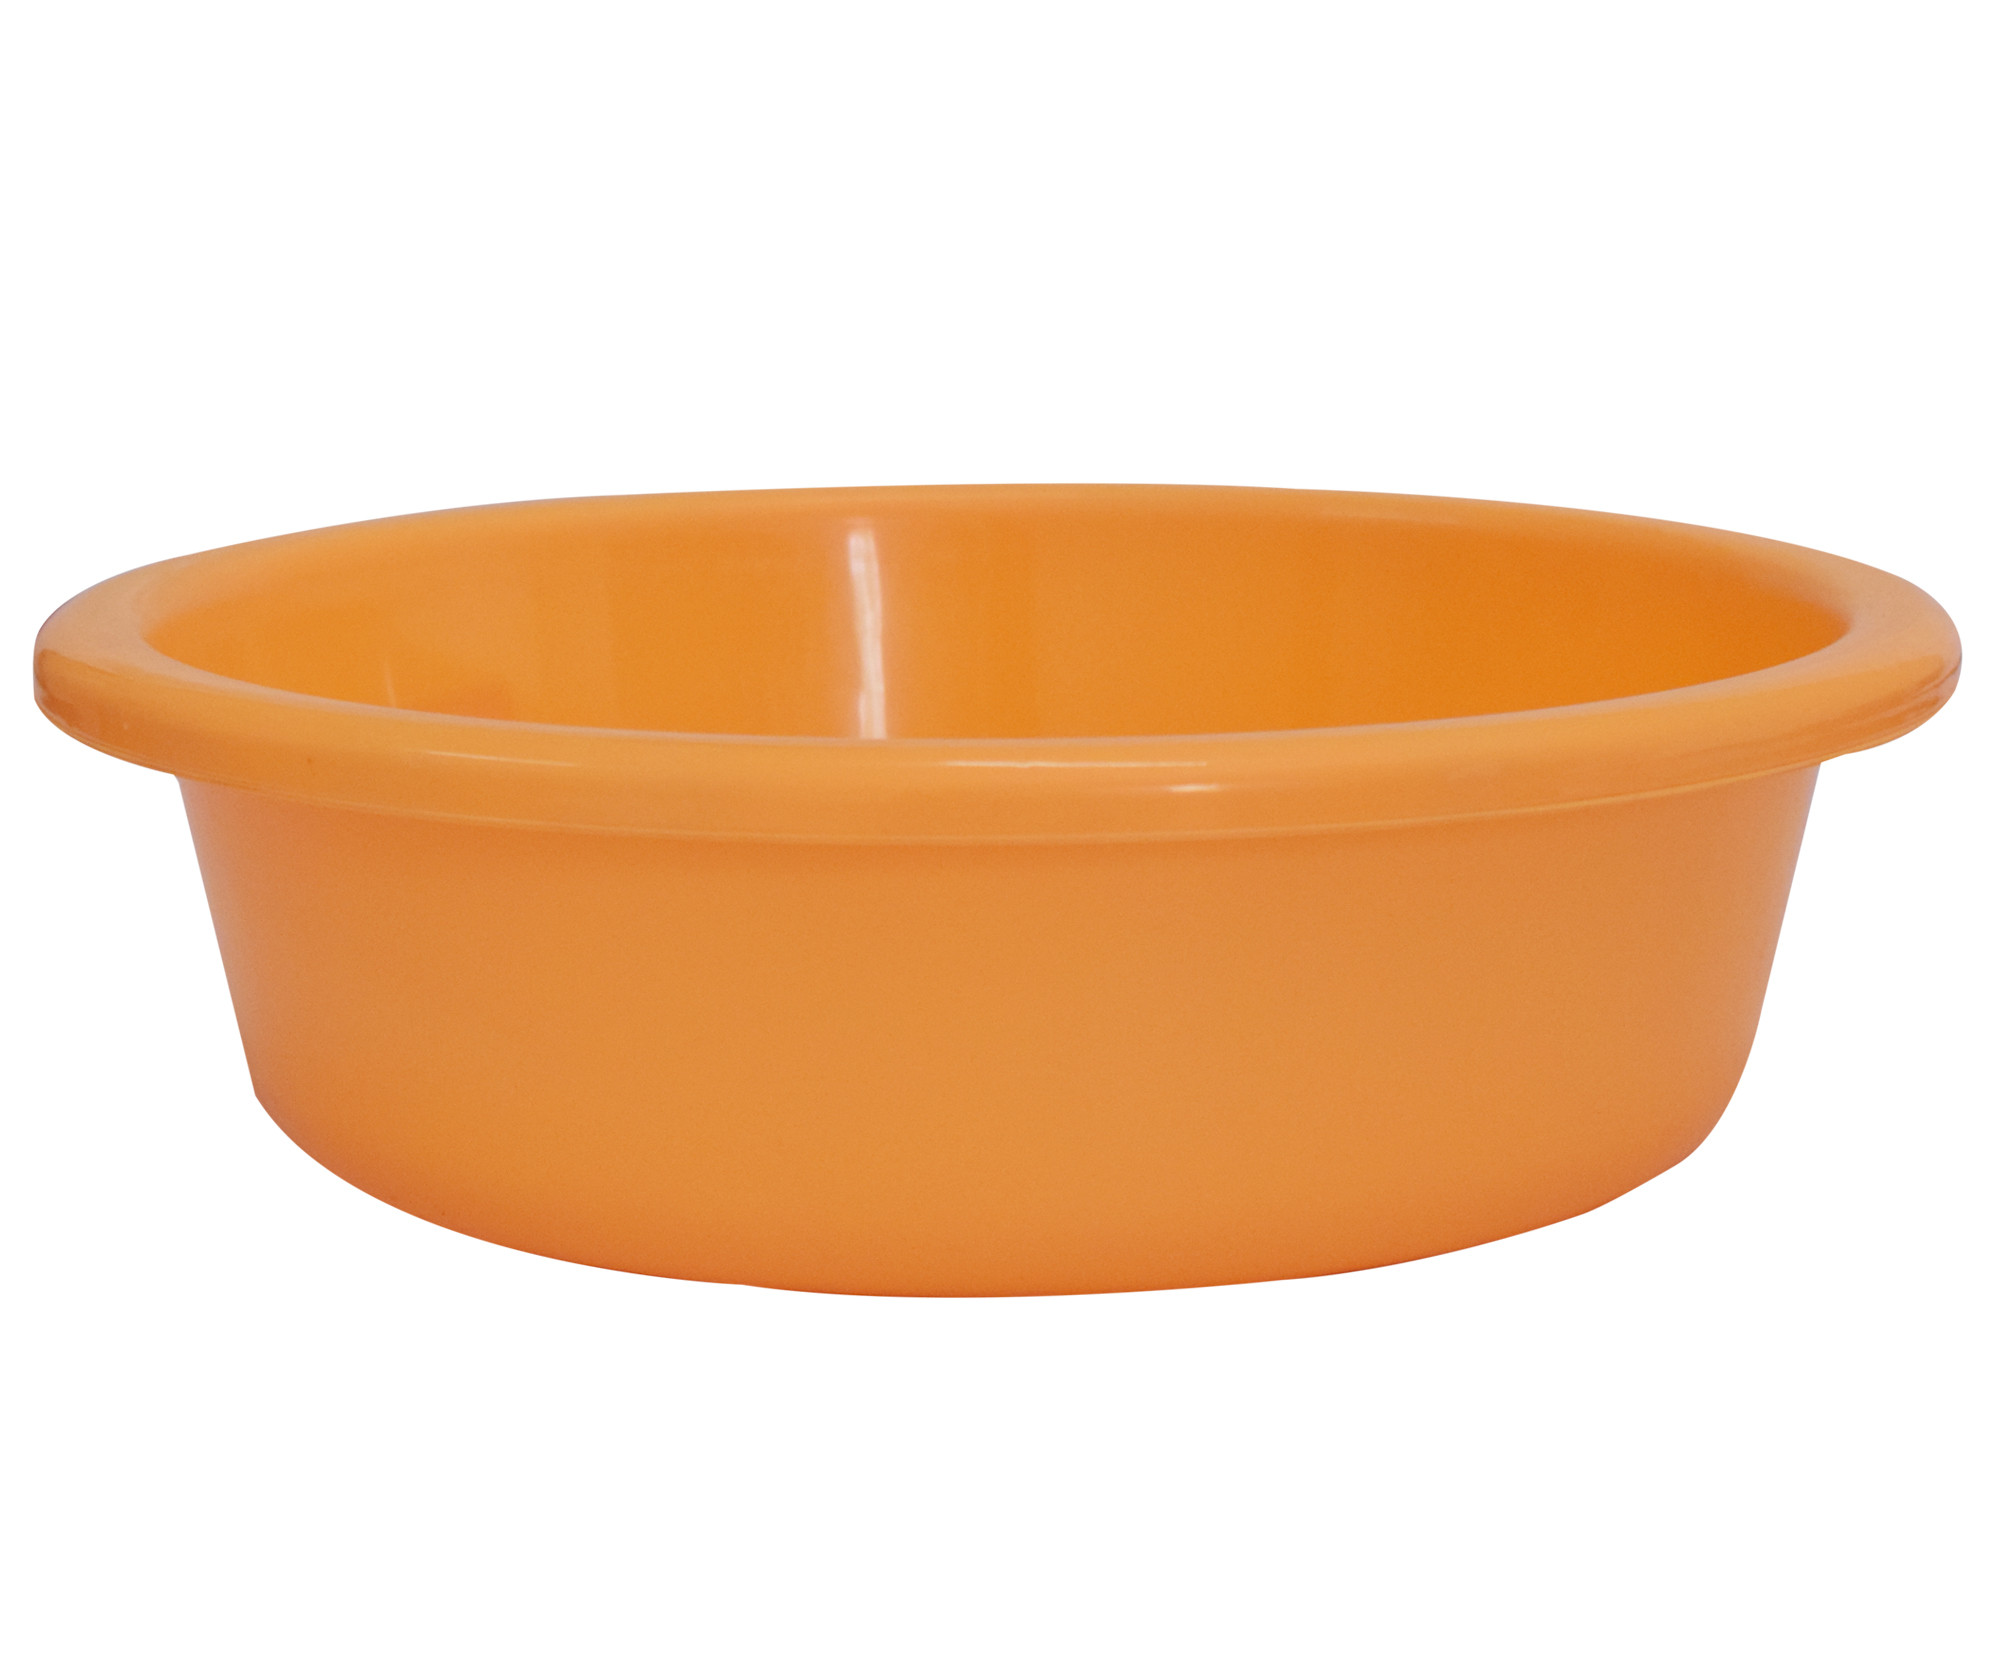 Kuber Industries Multiuses Unbreakable Plastic Knead Dough Basket/Basin Bowl For Home & Kitchen 6 Ltr- Pack of 2 (Yellow & Purple)